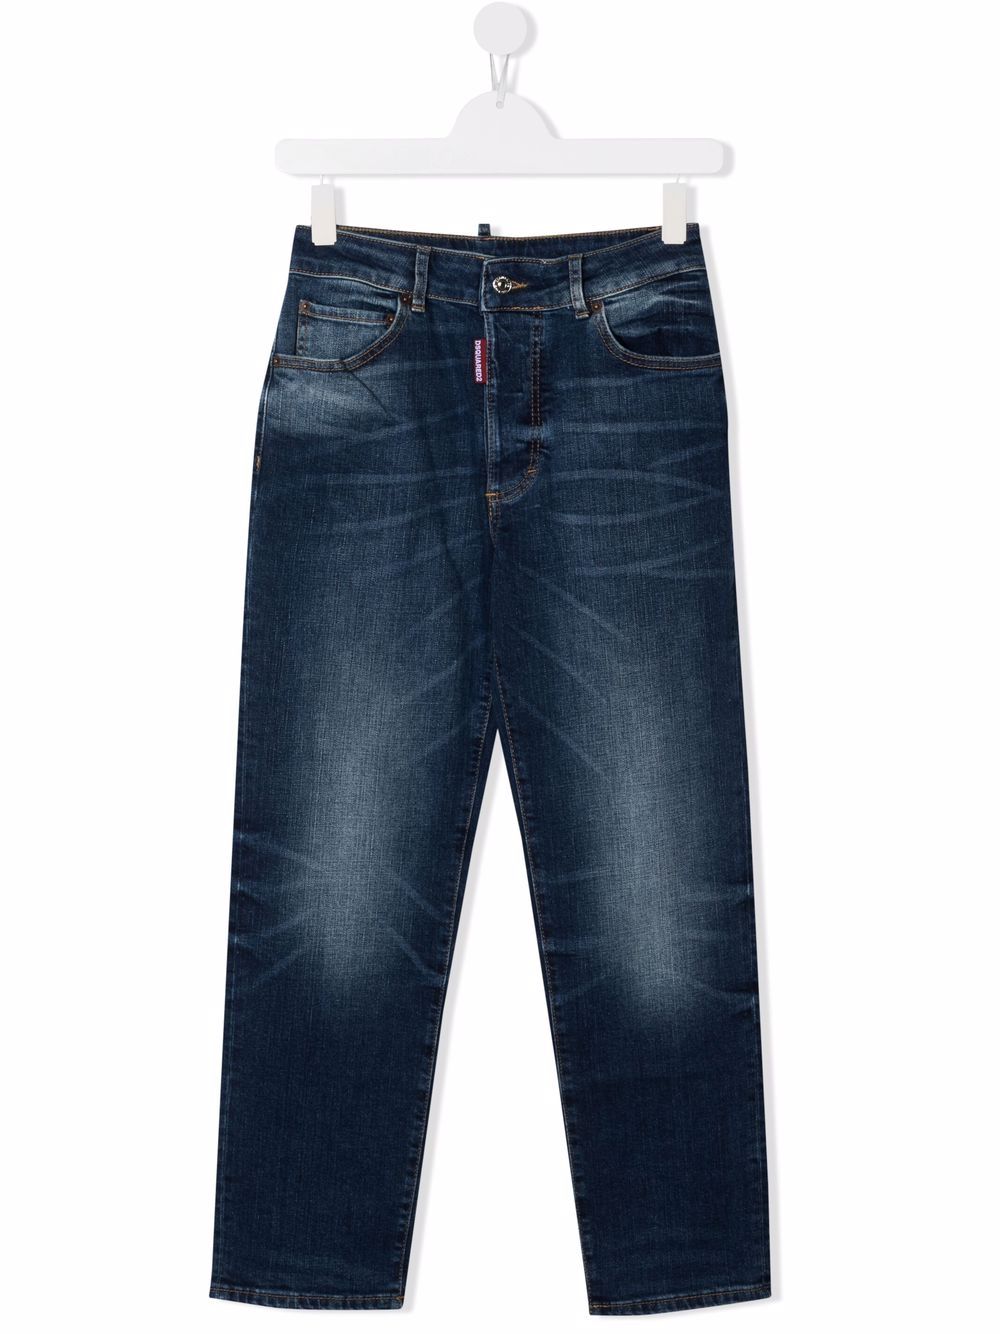 Blue jeans for boys with logo